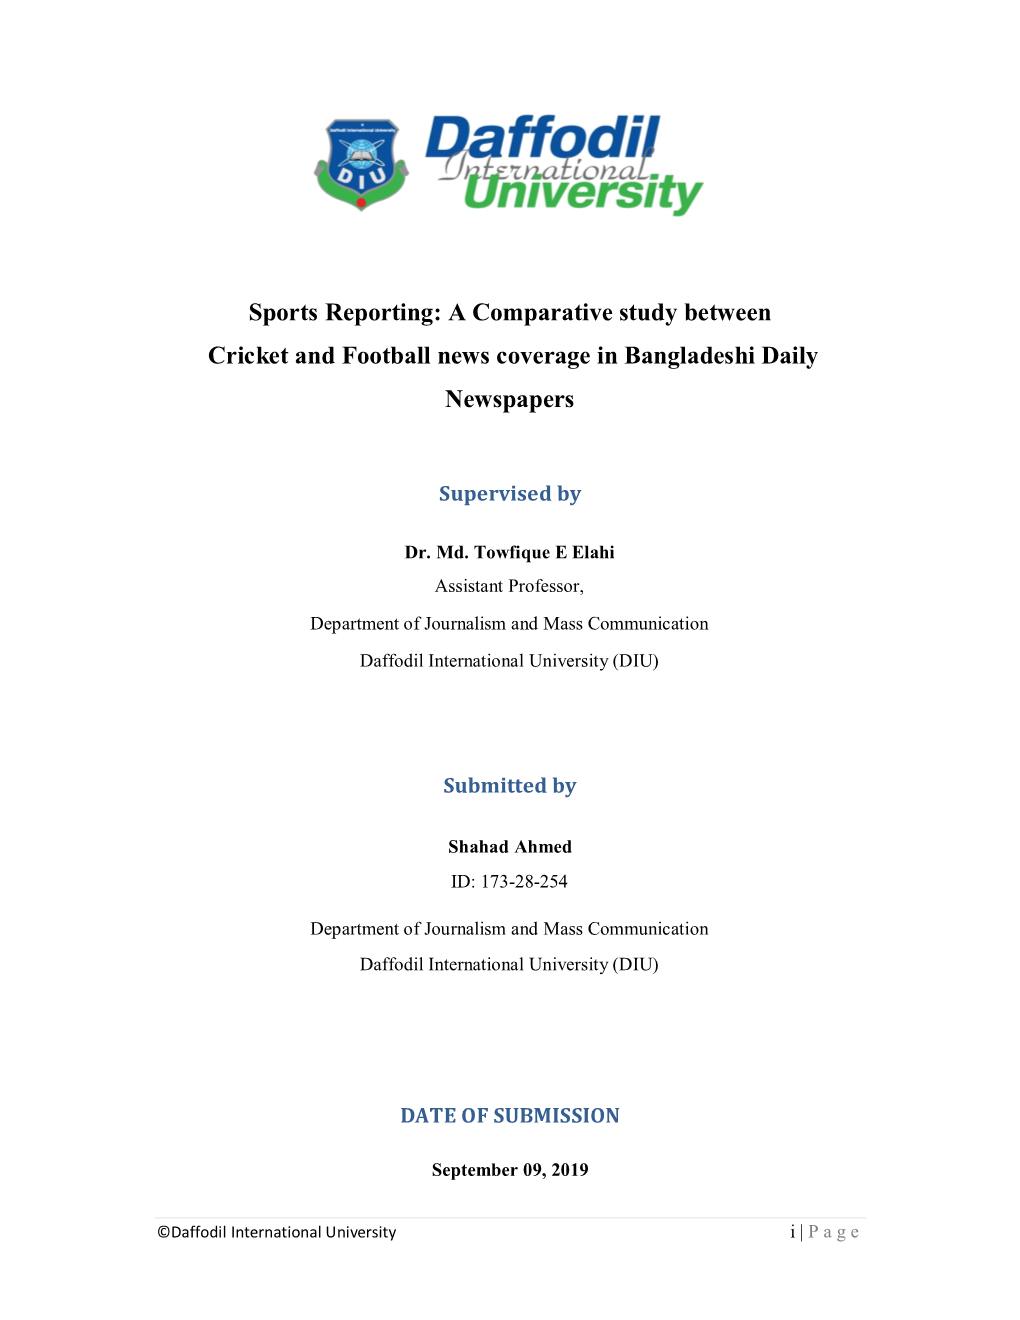 A Comparative Study Between Cricket and Football News Coverage in Bangladeshi Daily Newspapers